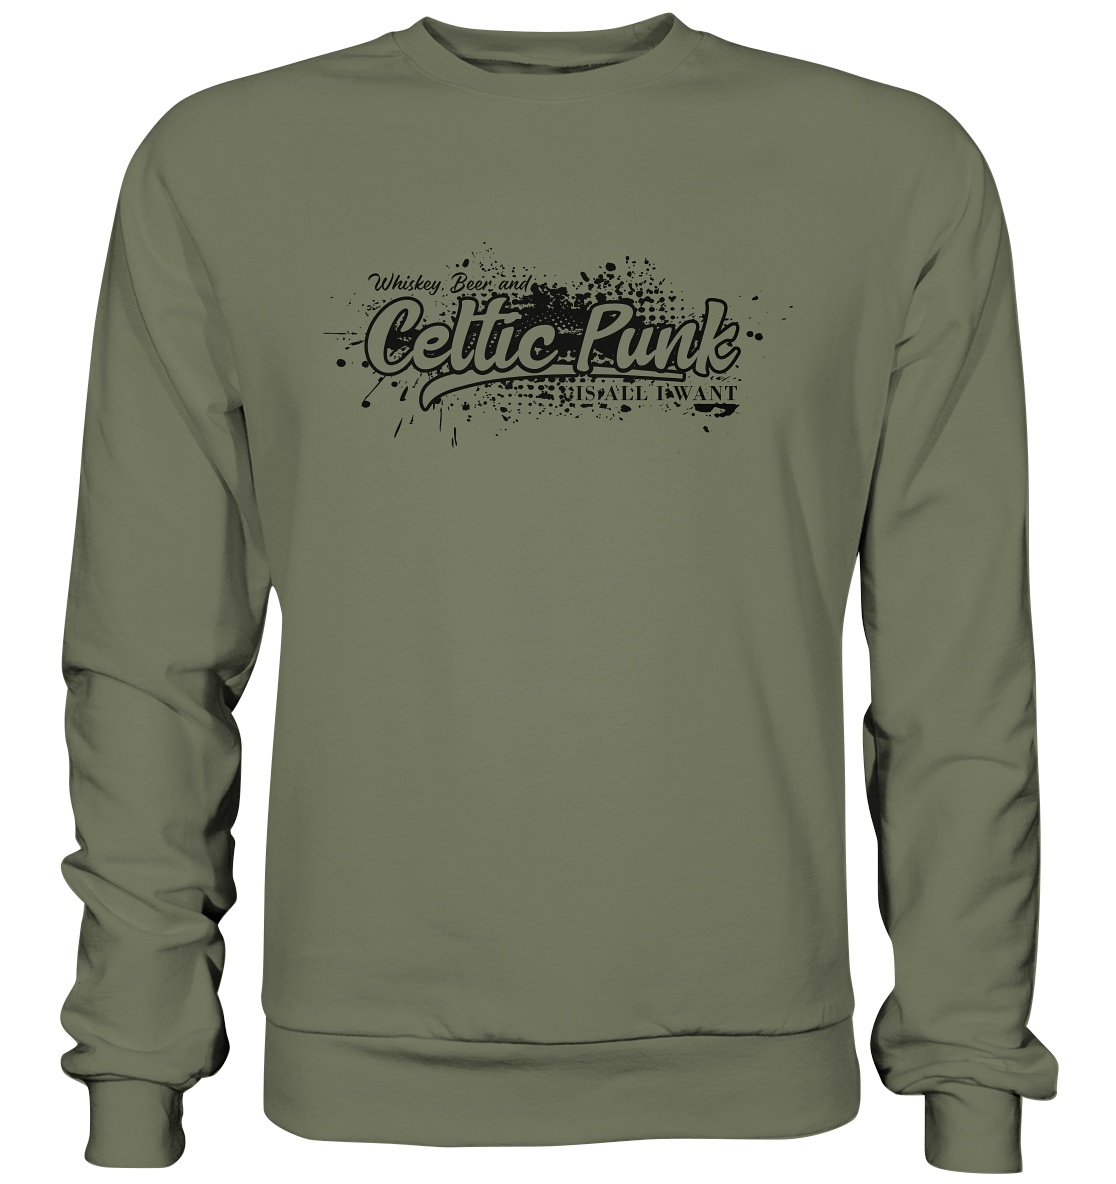 Whiskey, Beer And Celtic Punk "Is All I Want" - Premium Sweatshirt